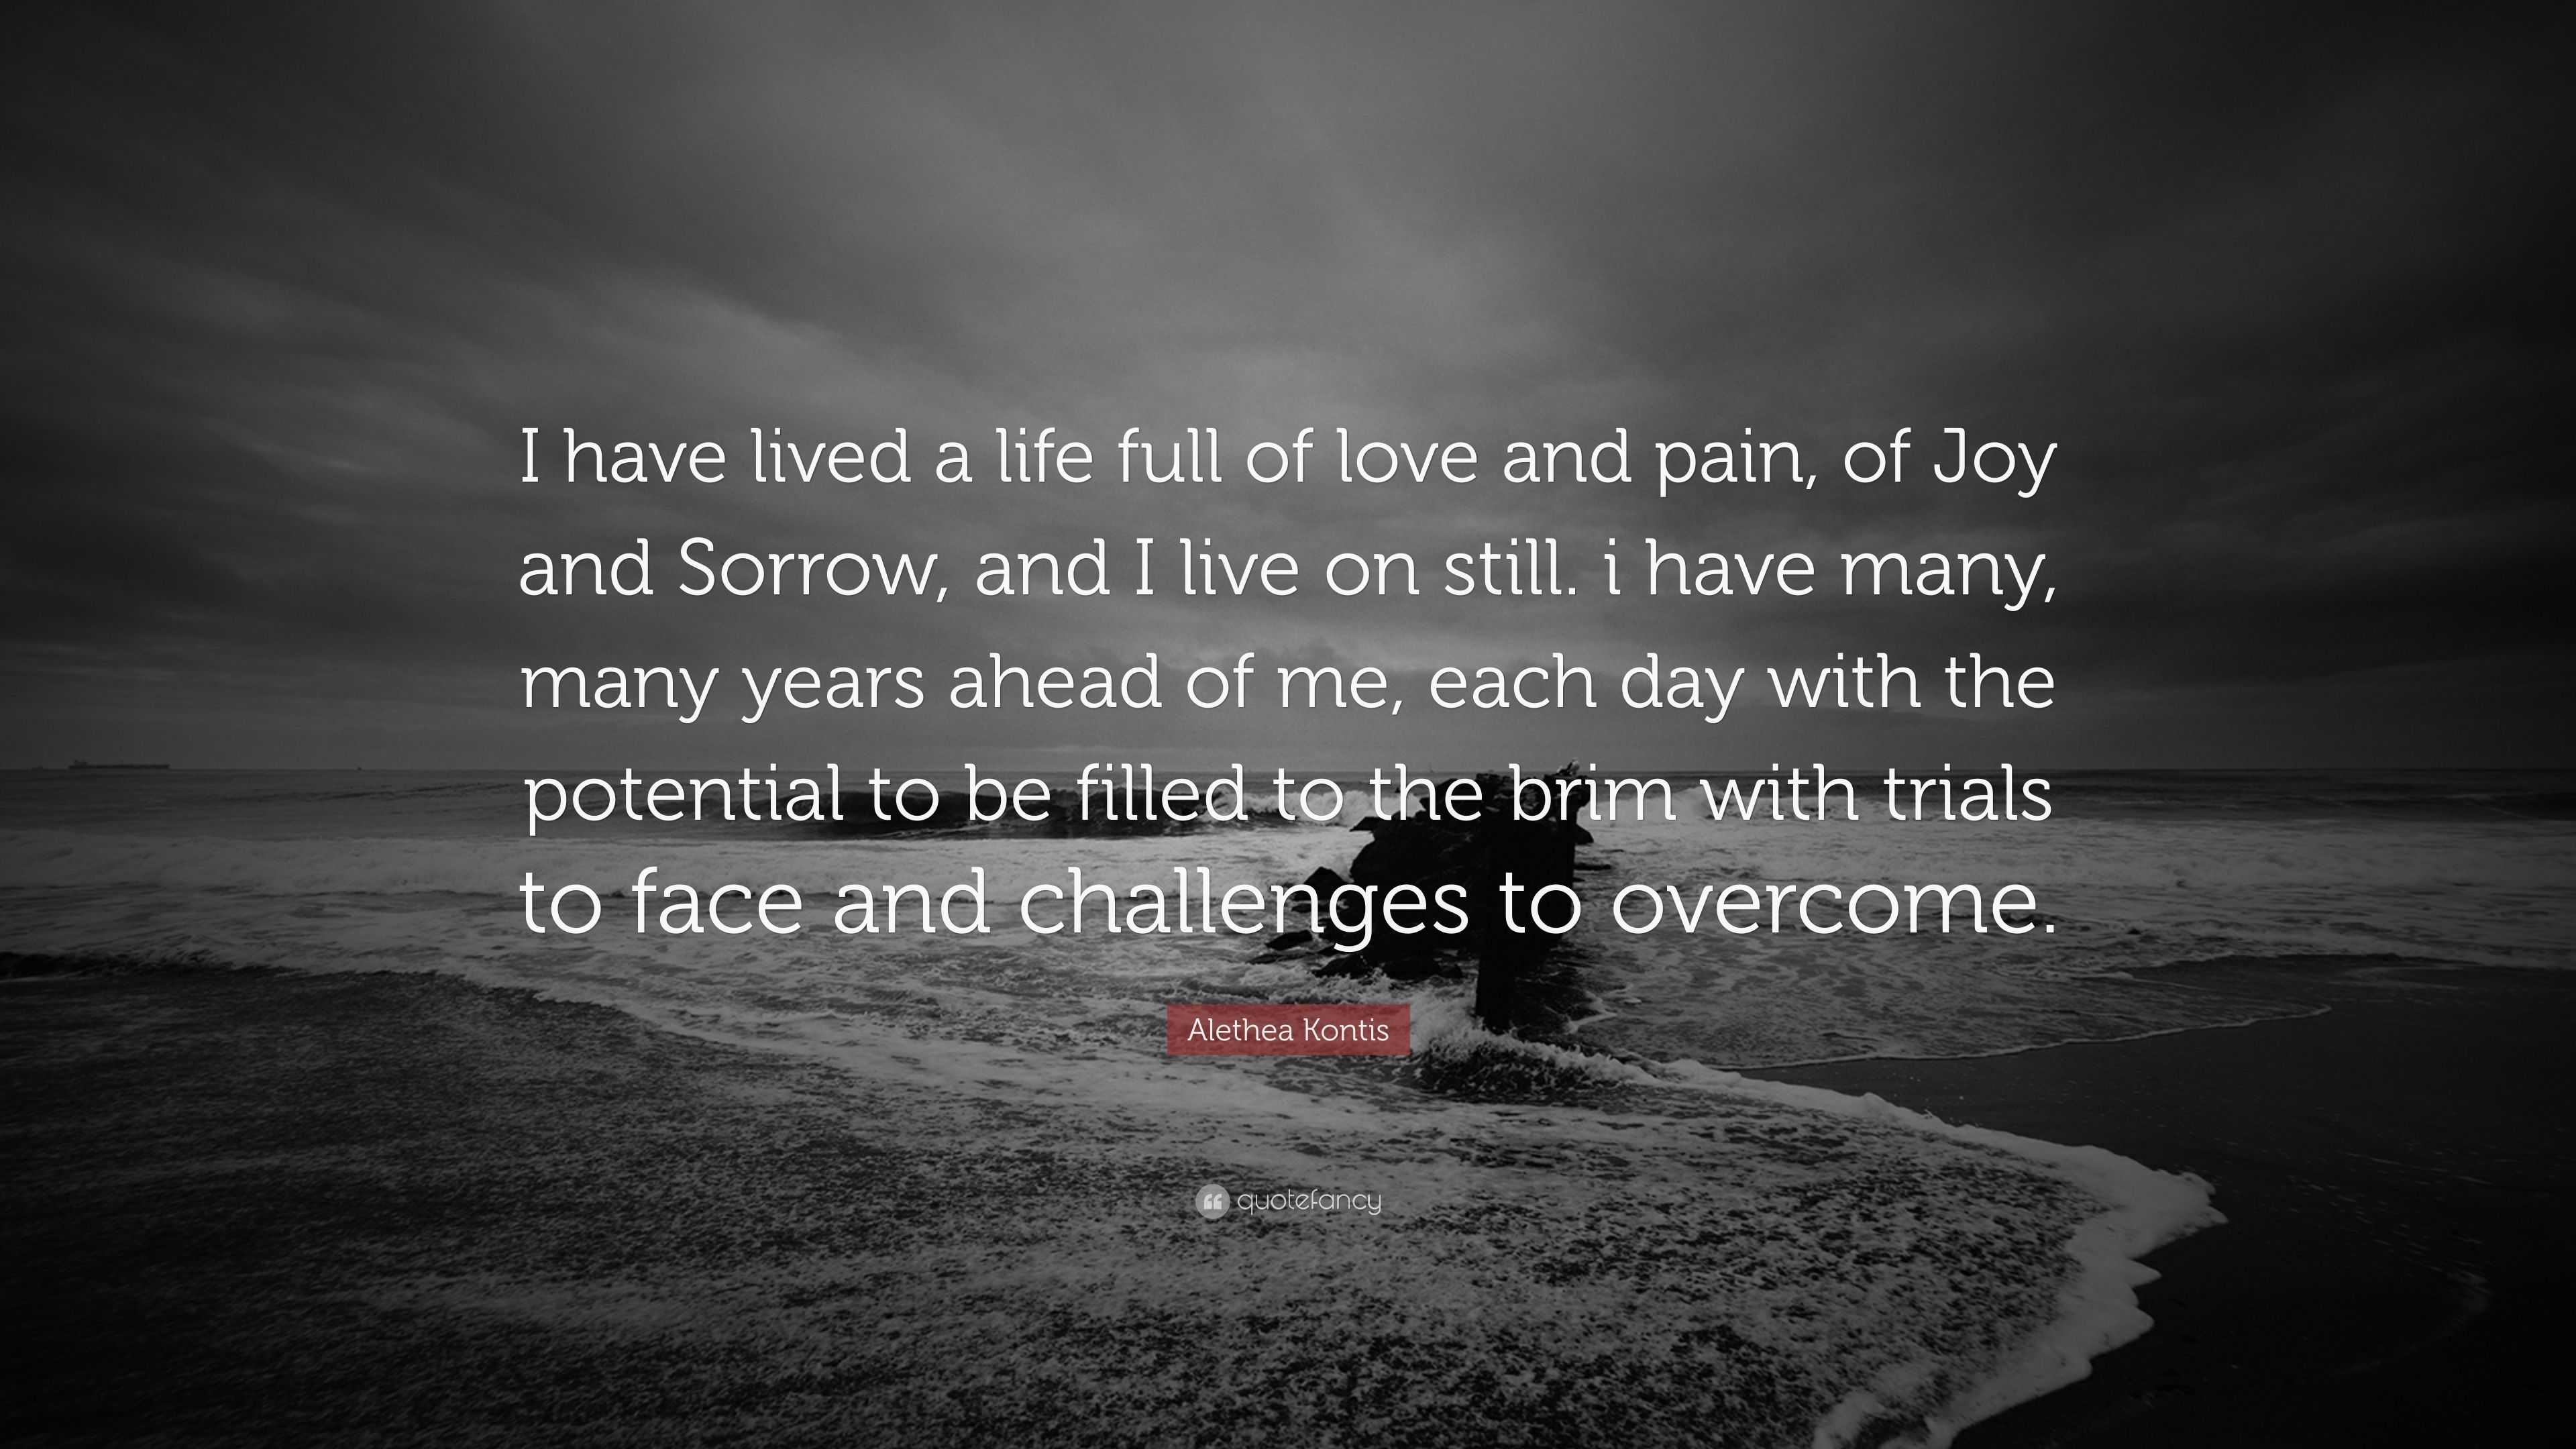 Alethea Kontis Quote “I have lived a life full of love and pain